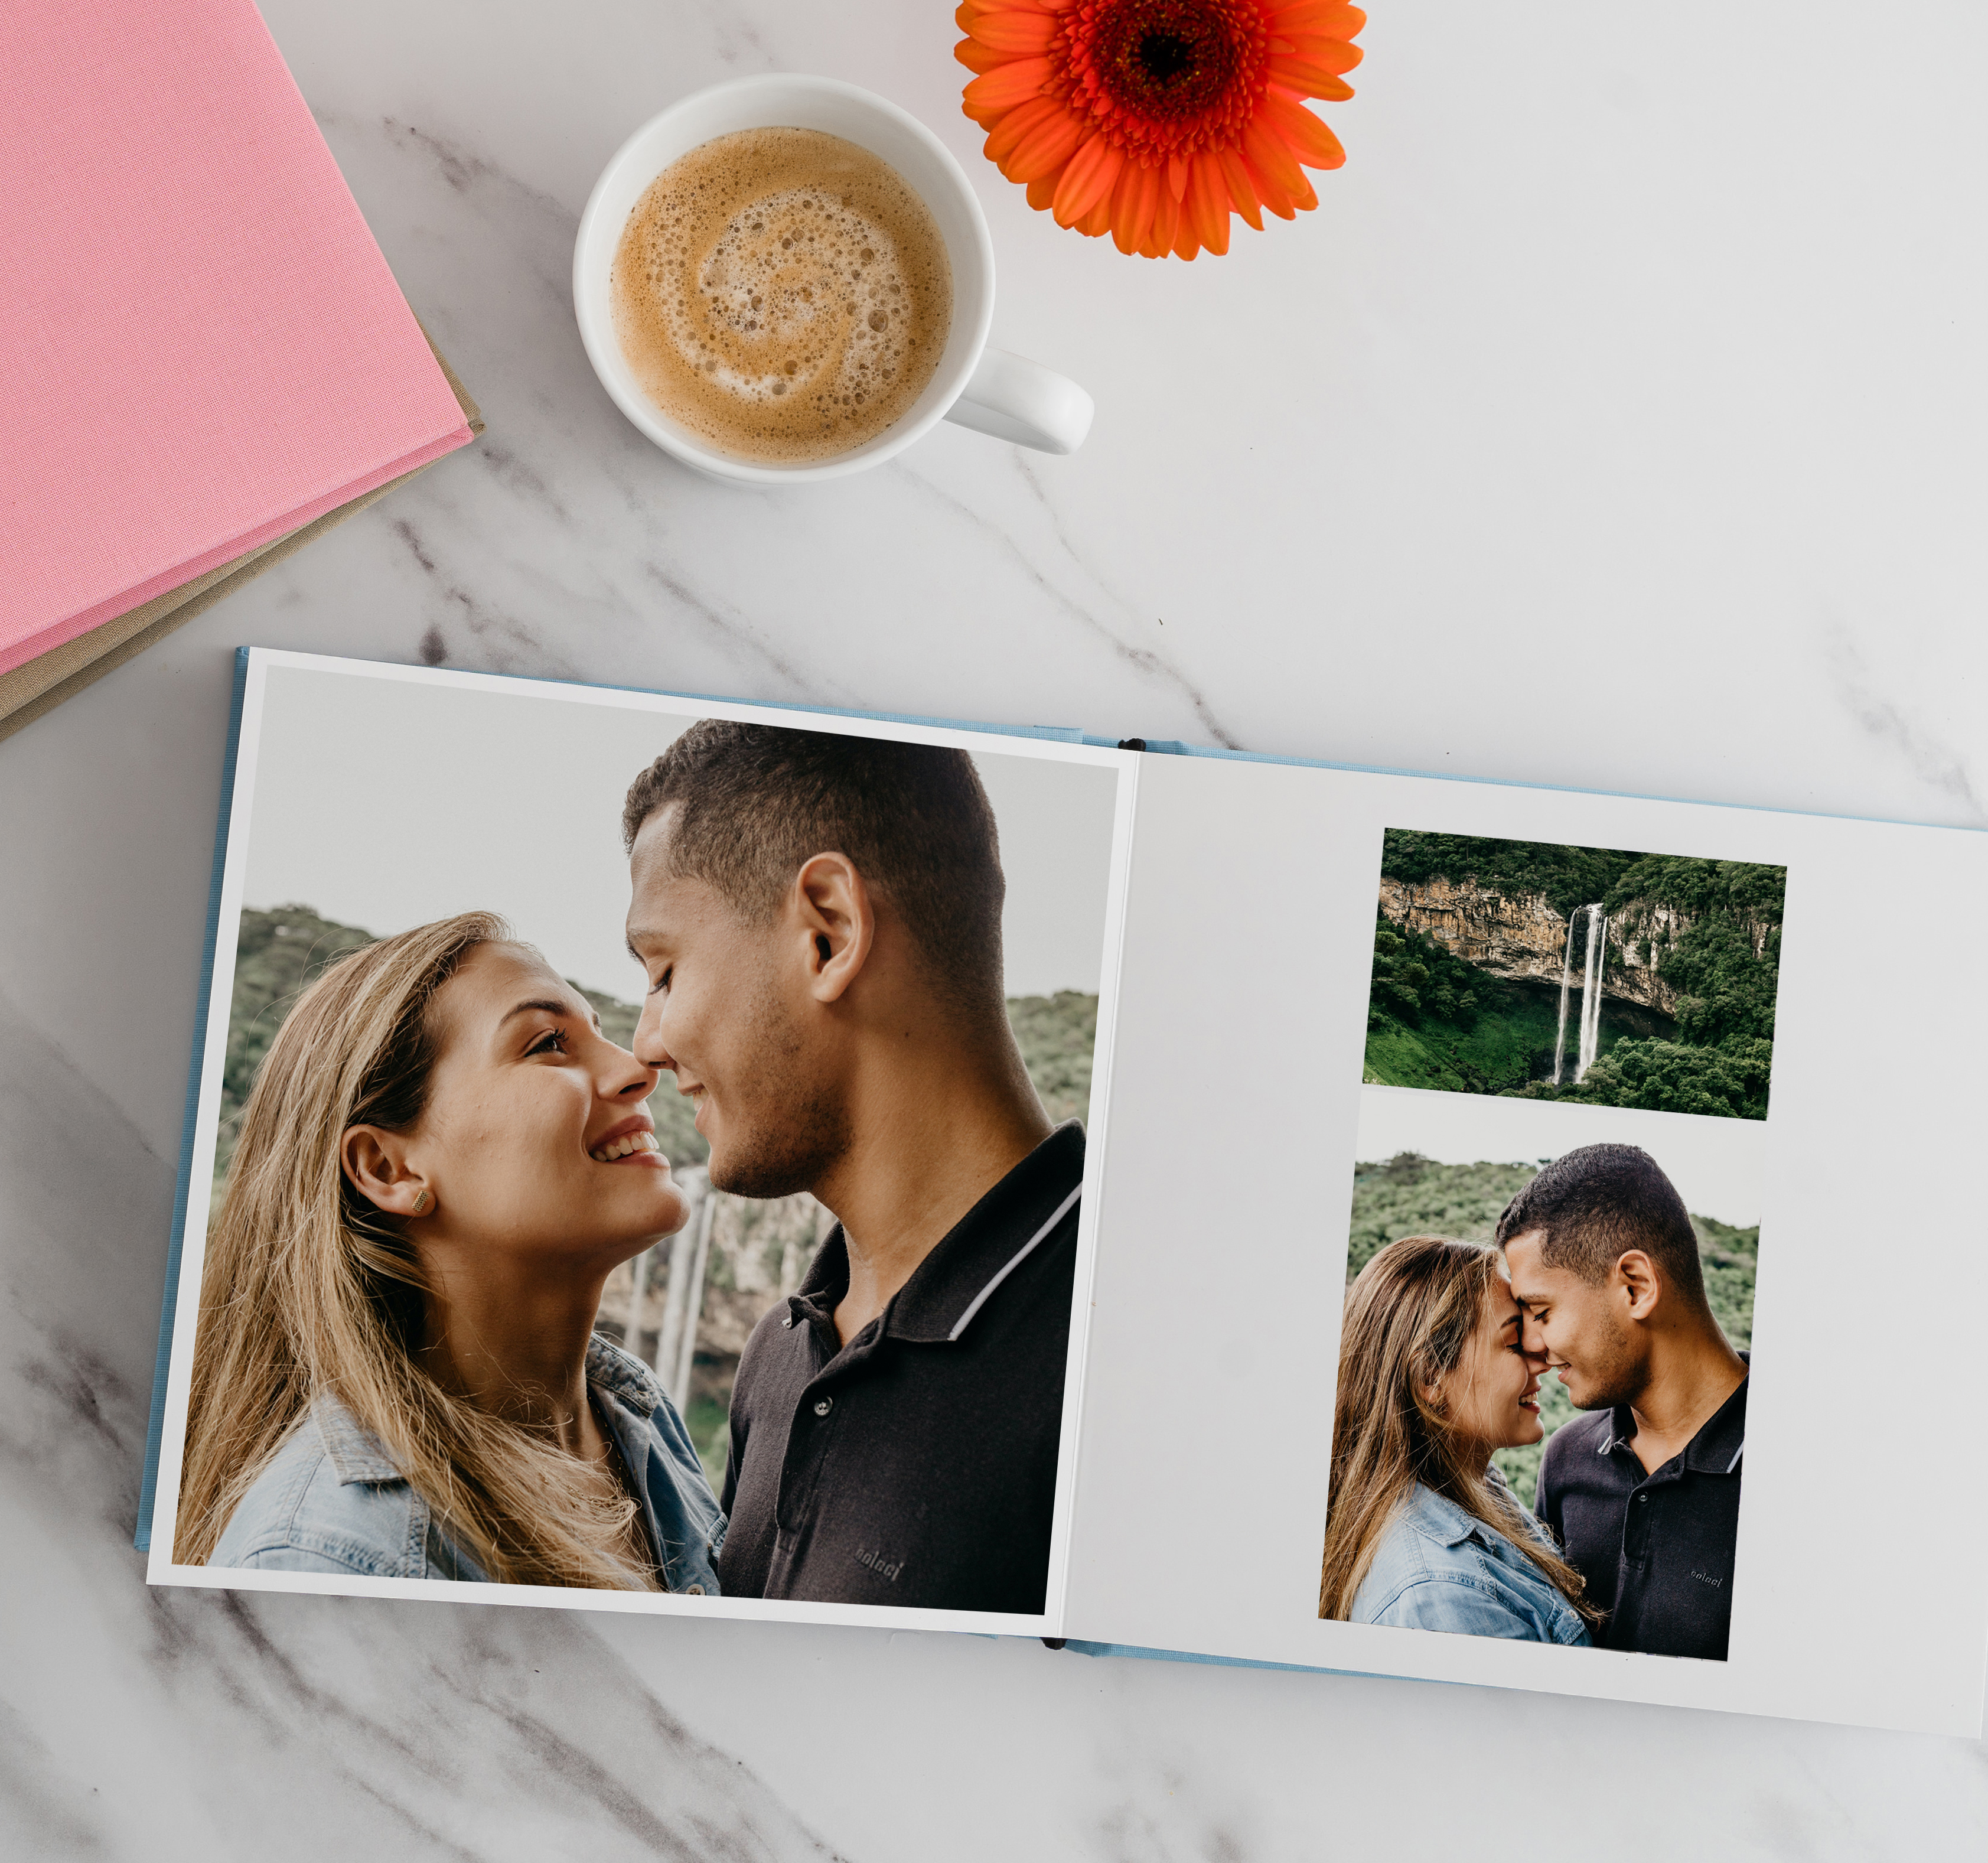 Photo book showing engagement photos of couple next to water fall.